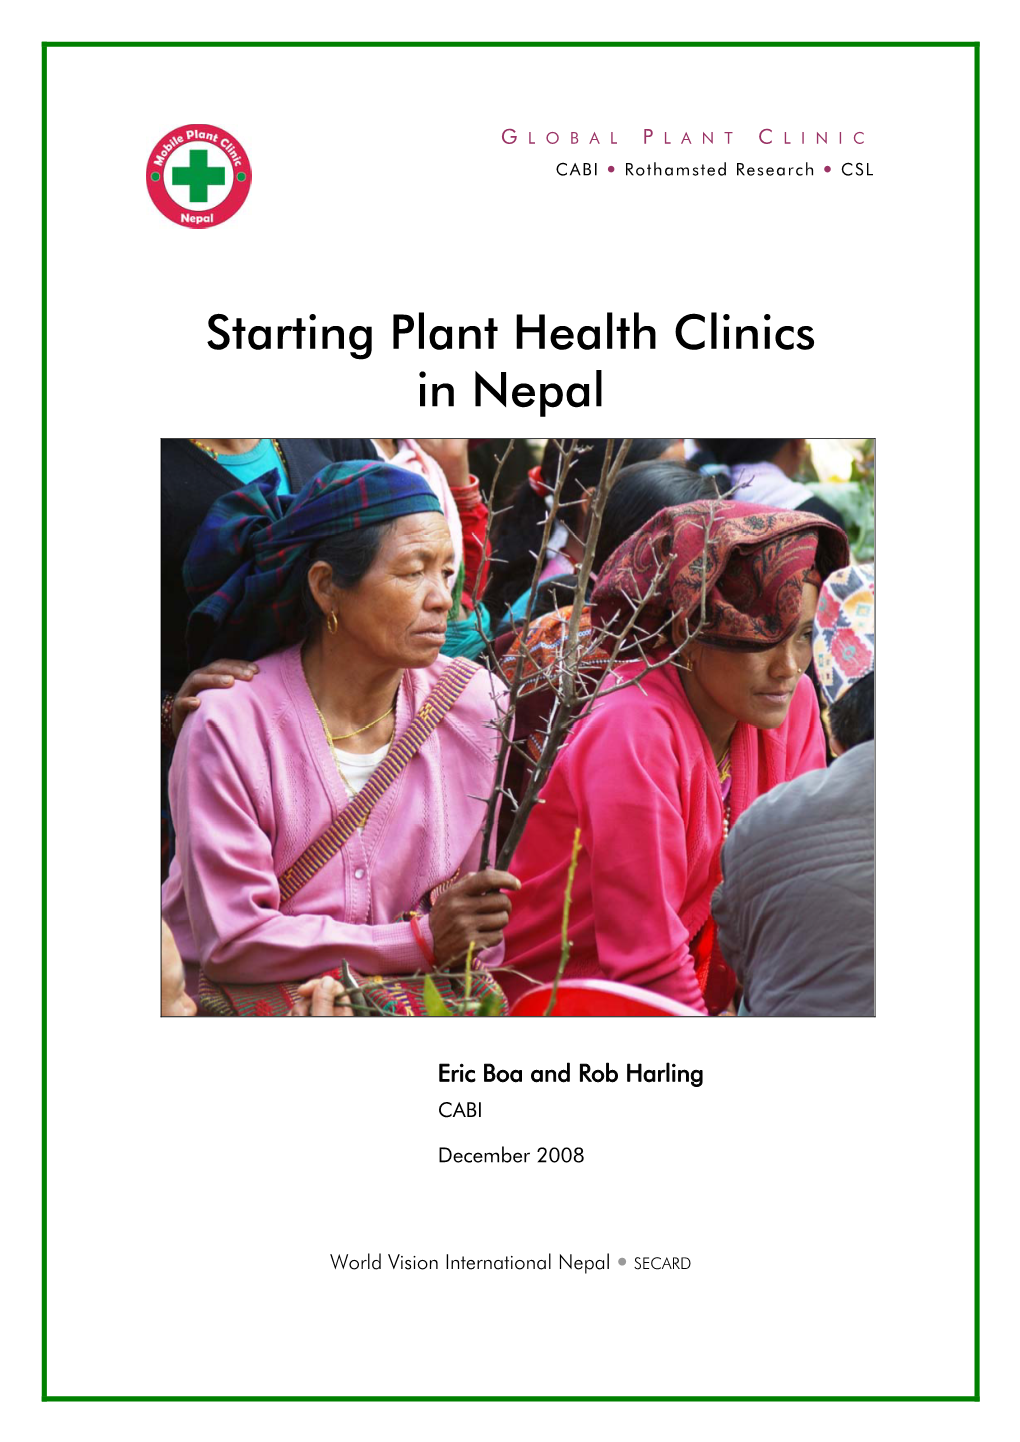 Starting Plant Health Clinics in Nepal